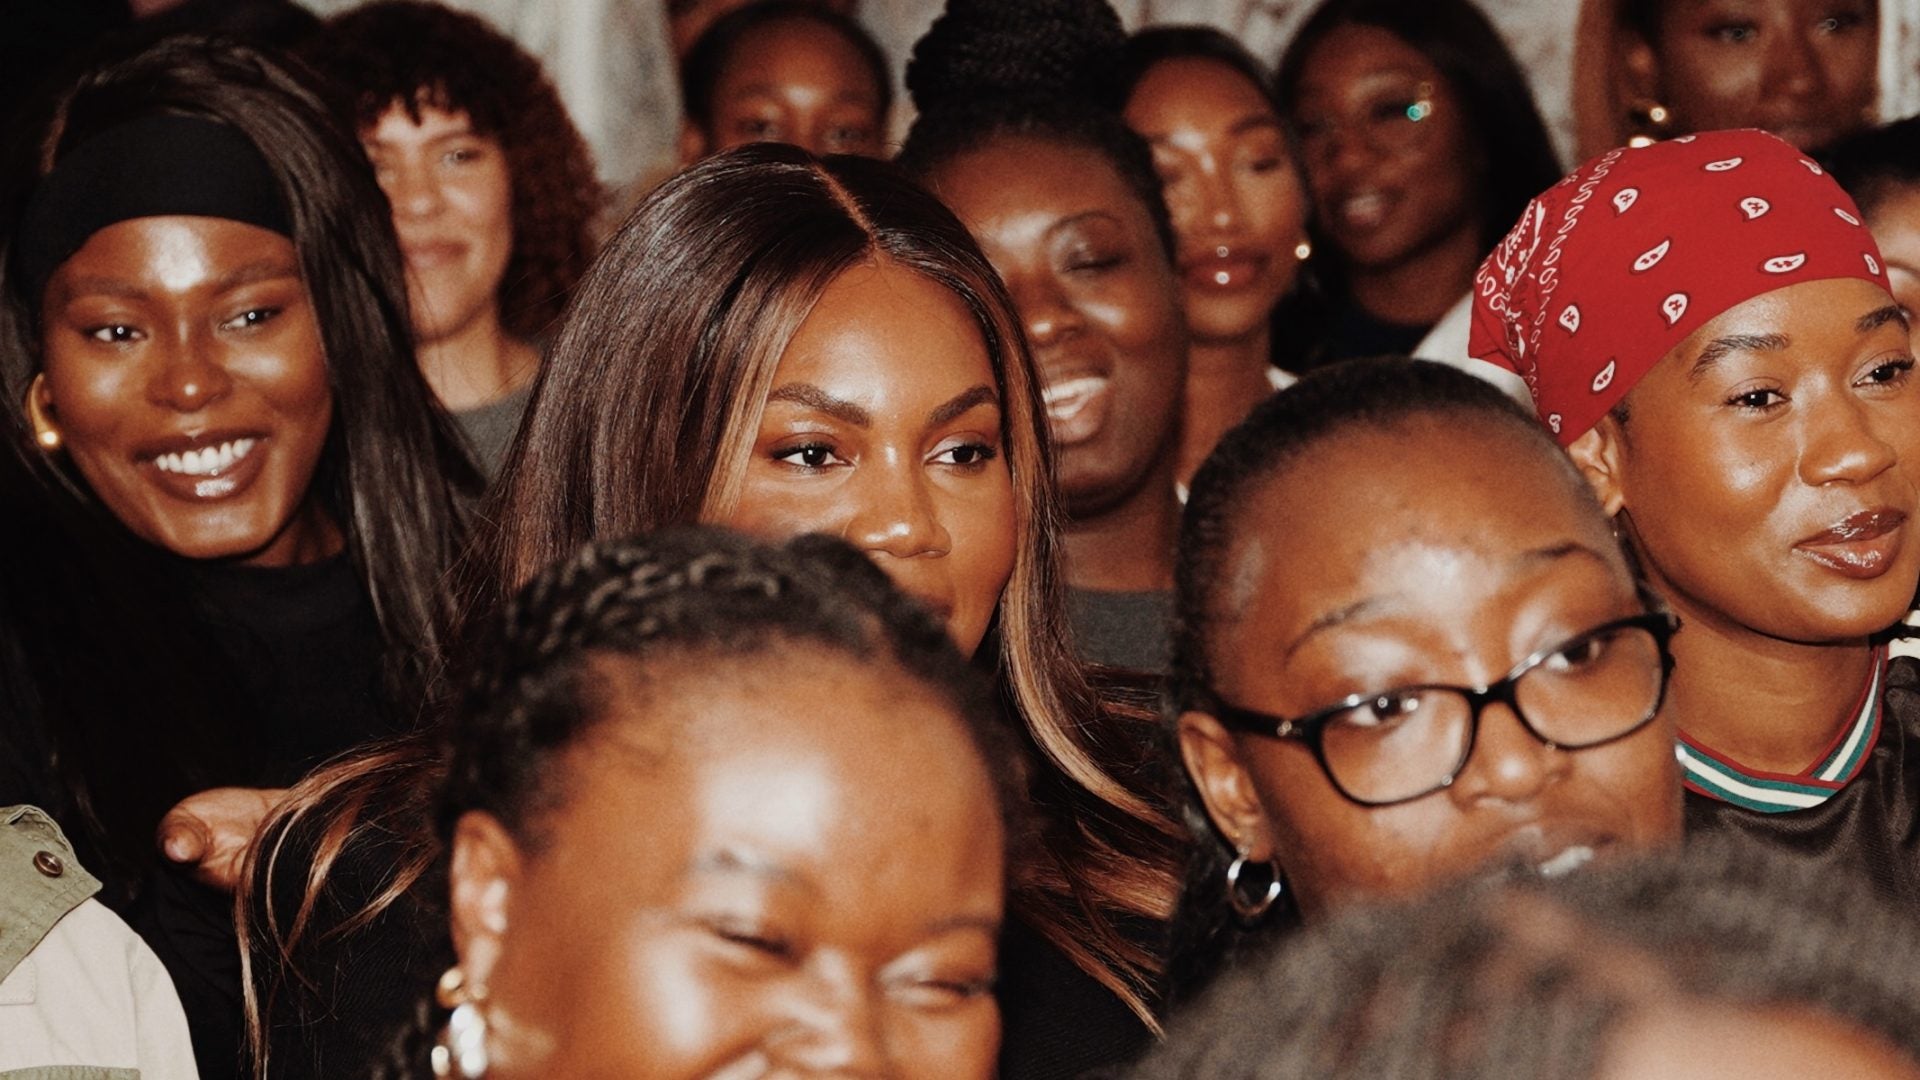 The Black Beauty Club Is Working To Uplift Our Community